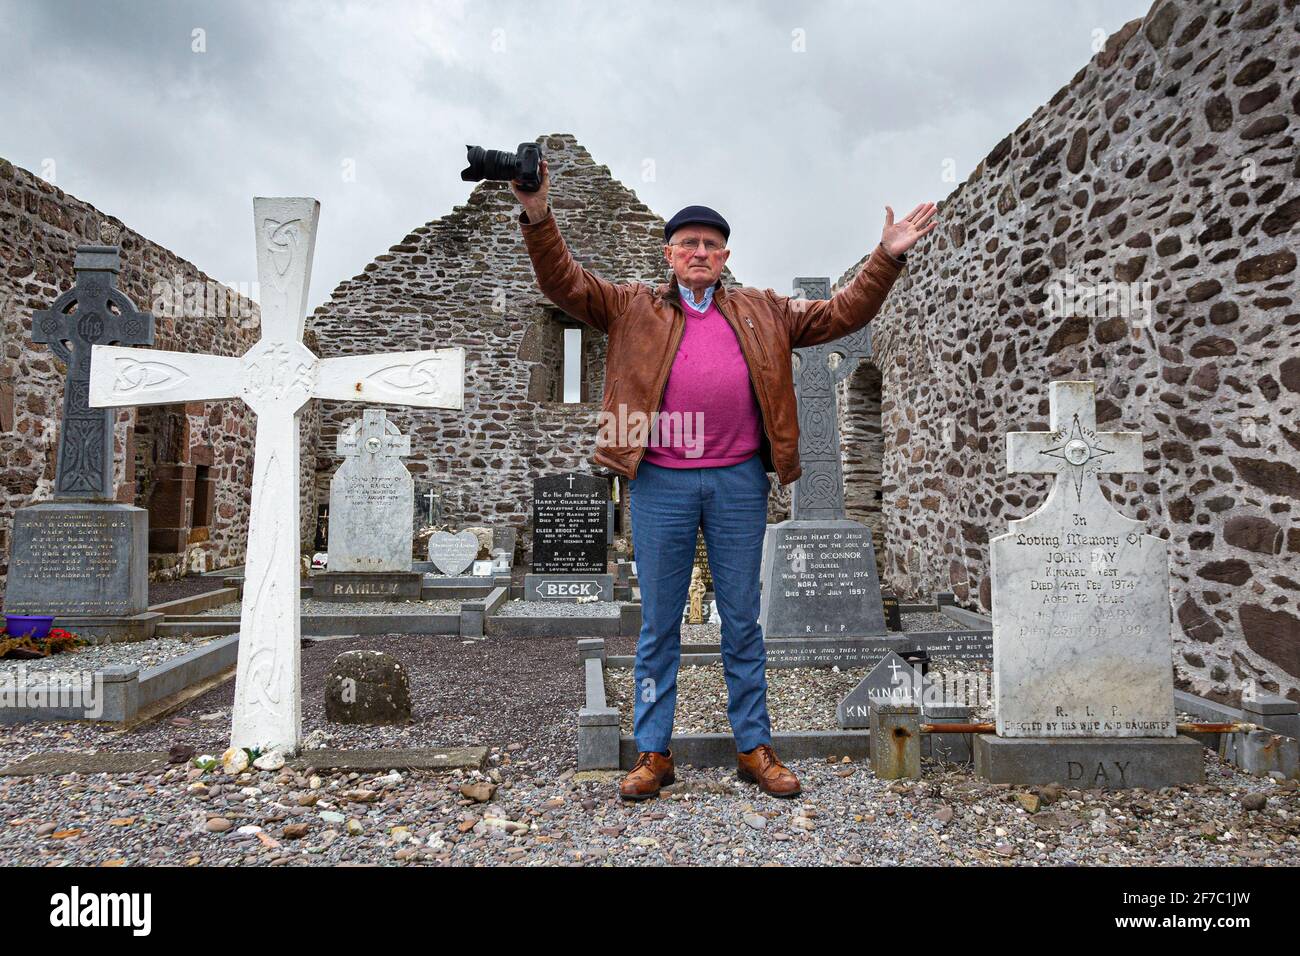 Senior citizen in churchyard, being positive about life Stock Photo